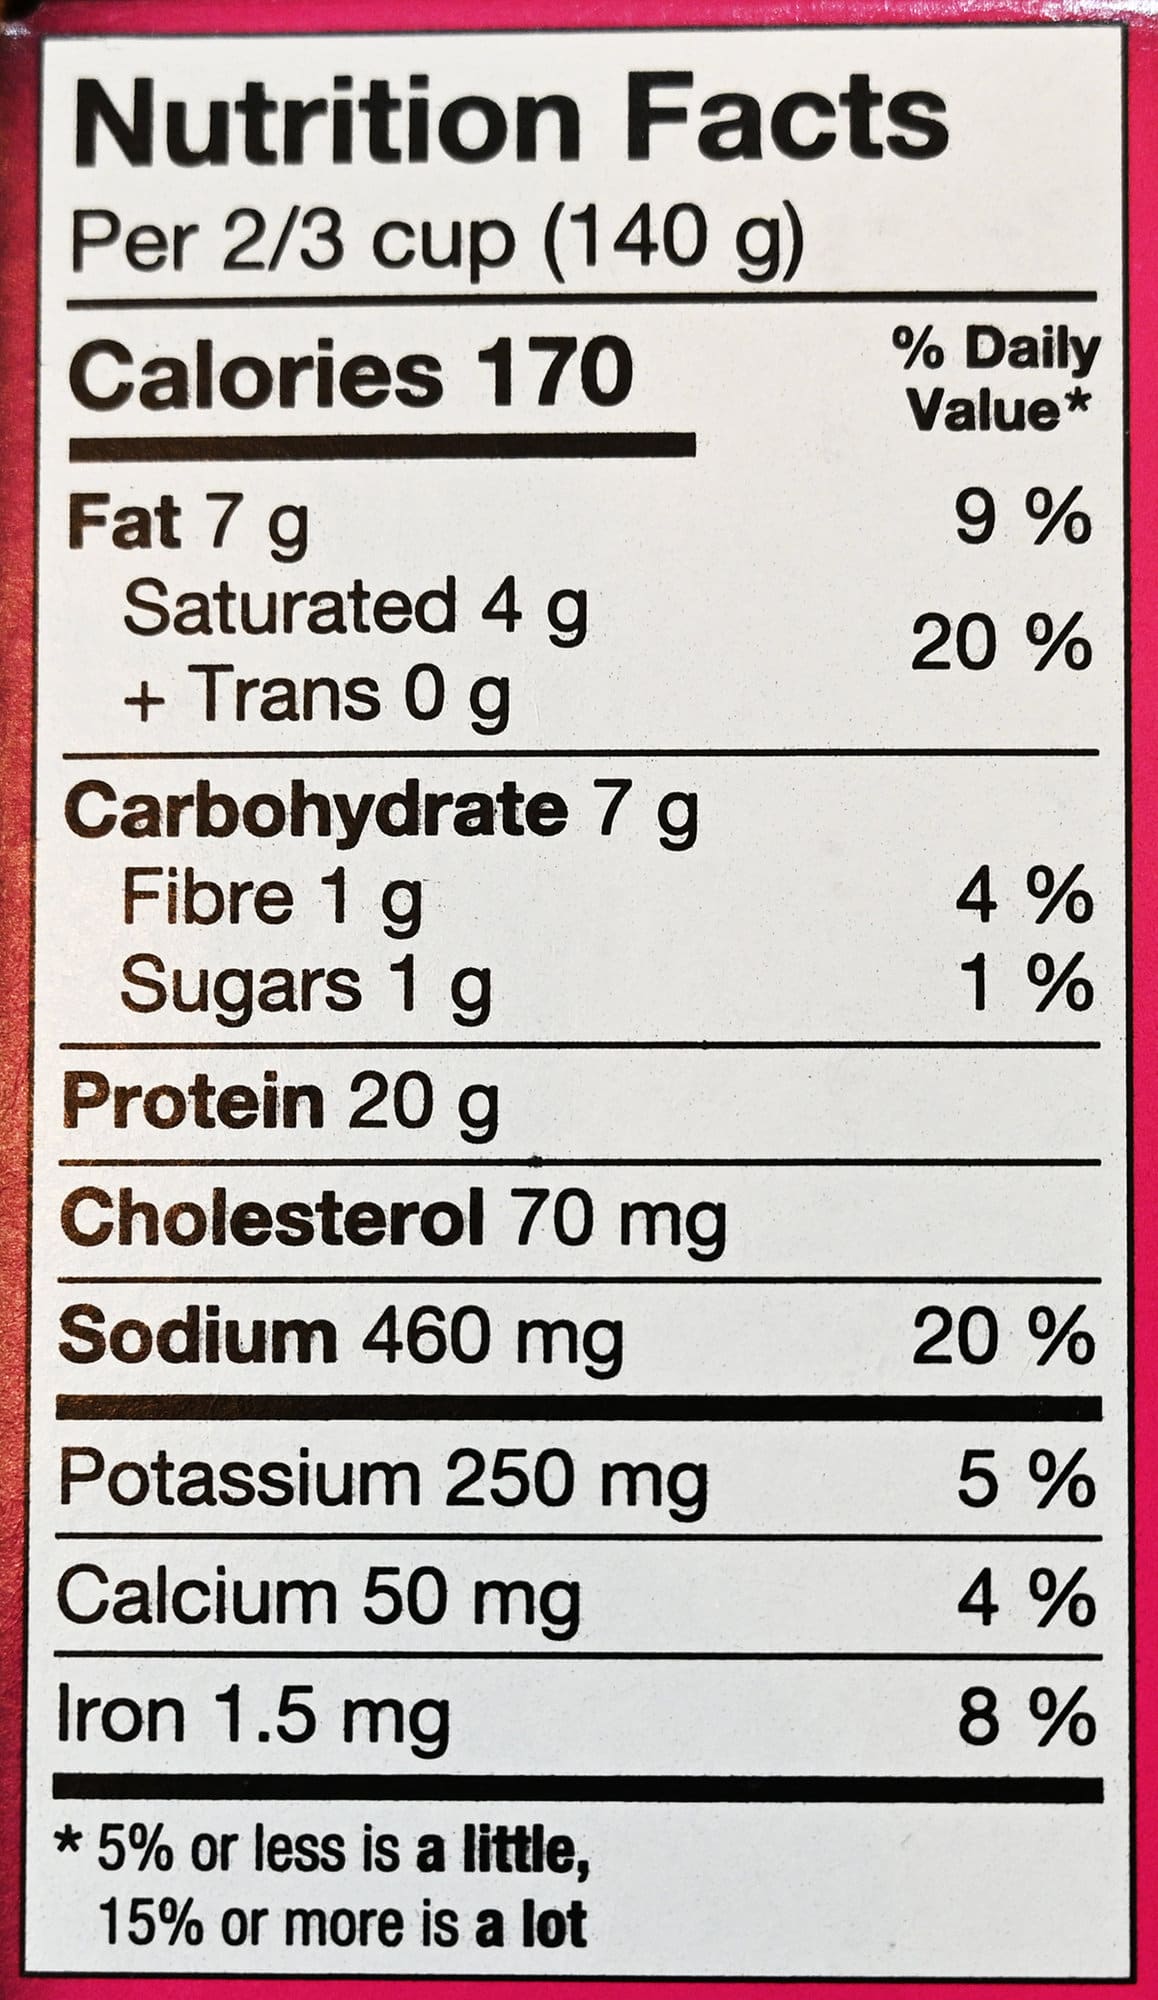 Image of the nutrition facts from the back of the packaging.